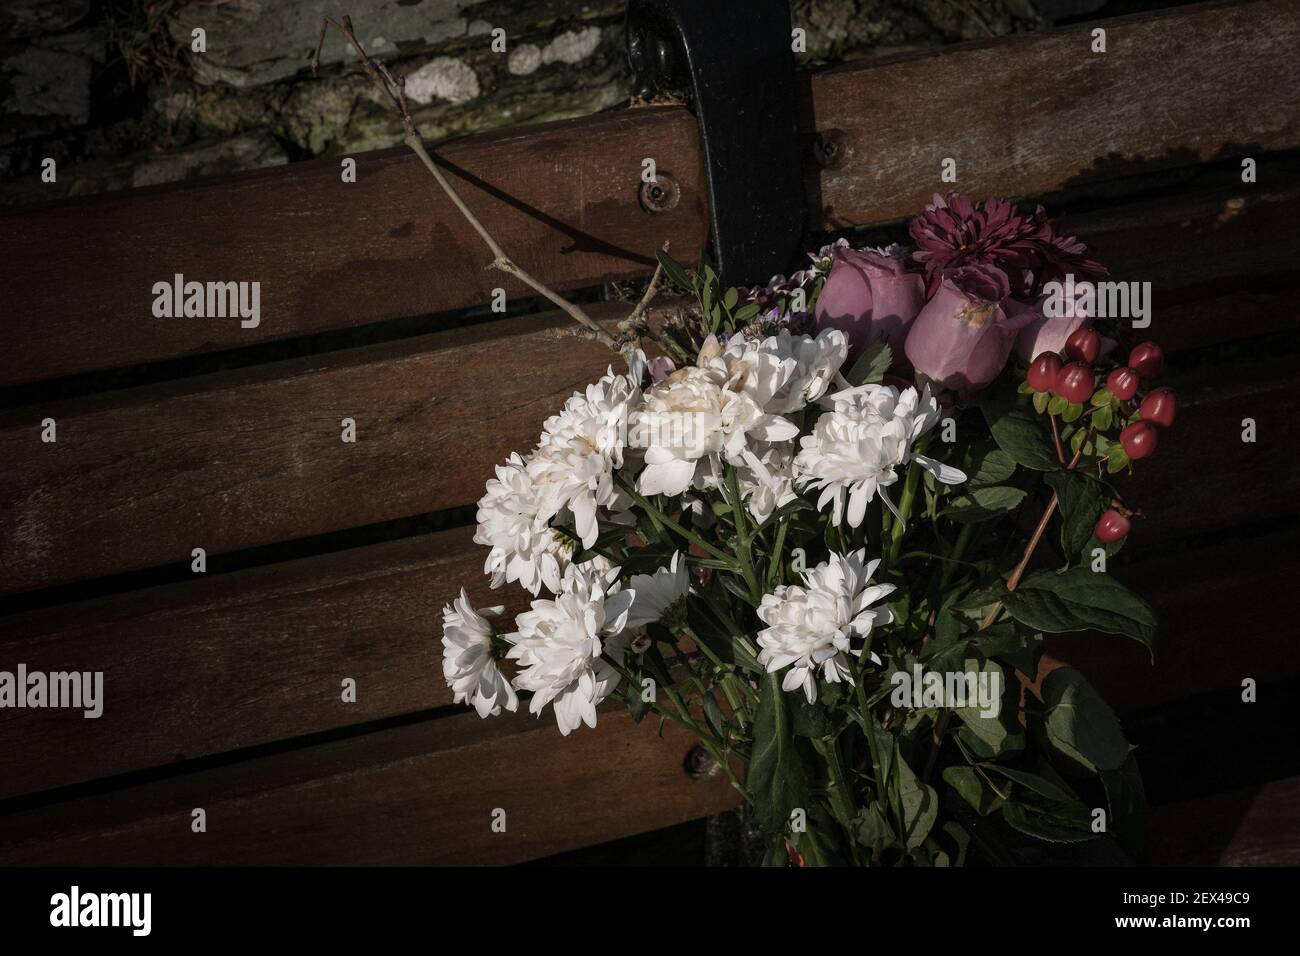 A bouquet of wilting flowers left on a bench in remebrance. Stock Photo